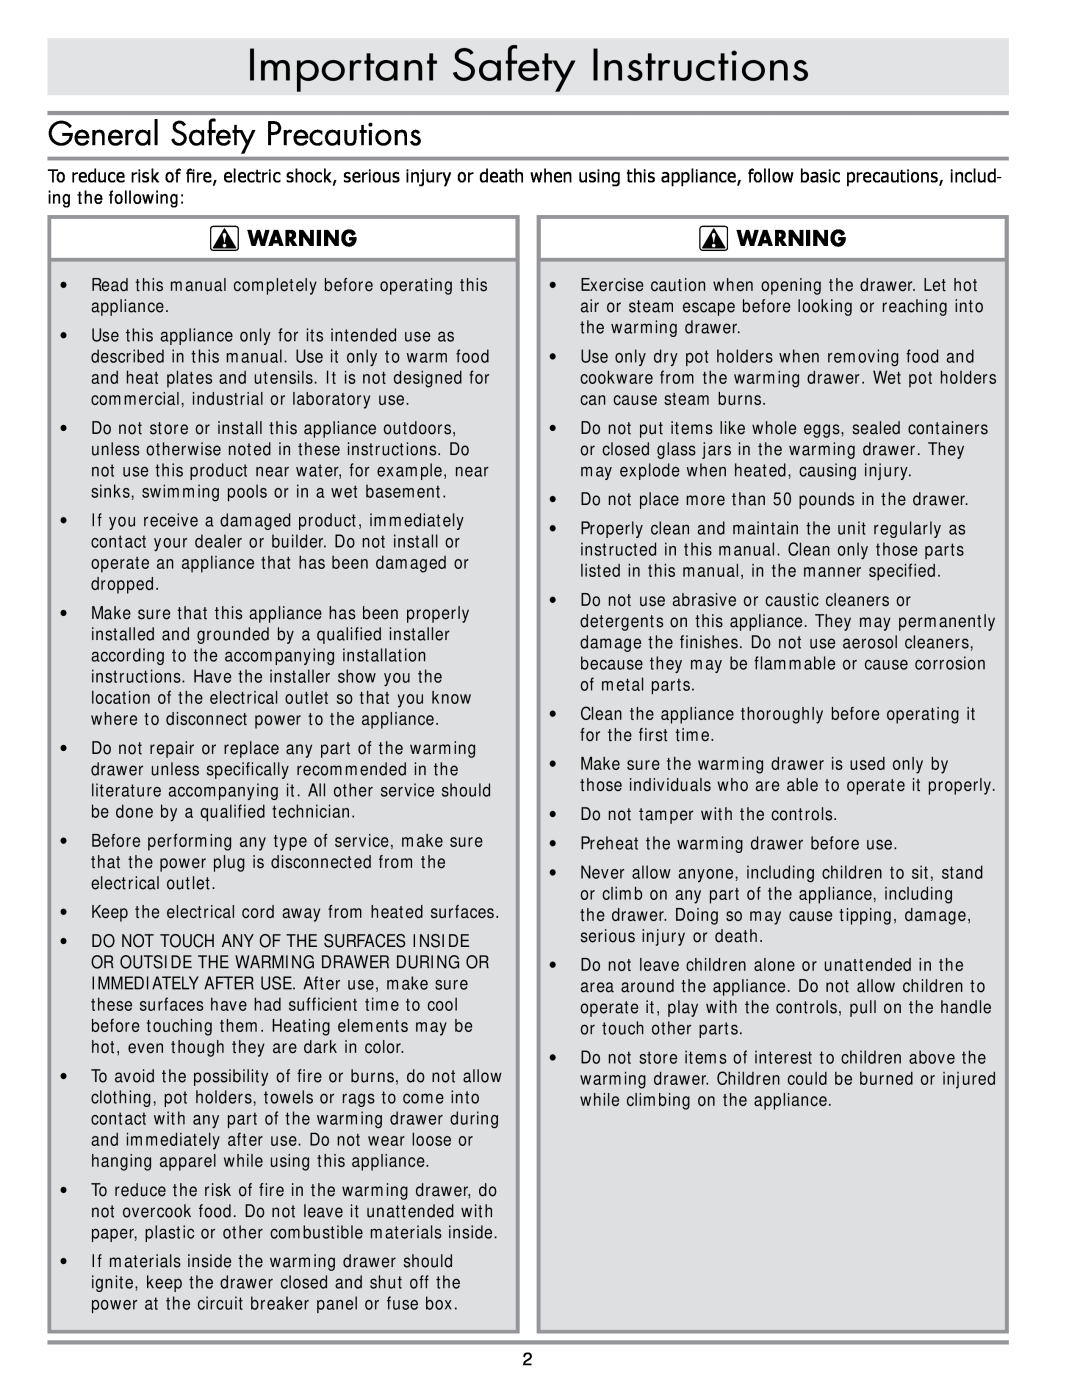 Dacor MRWD30, MRWD27 important safety instructions Important Safety Instructions, General Safety Precautions 